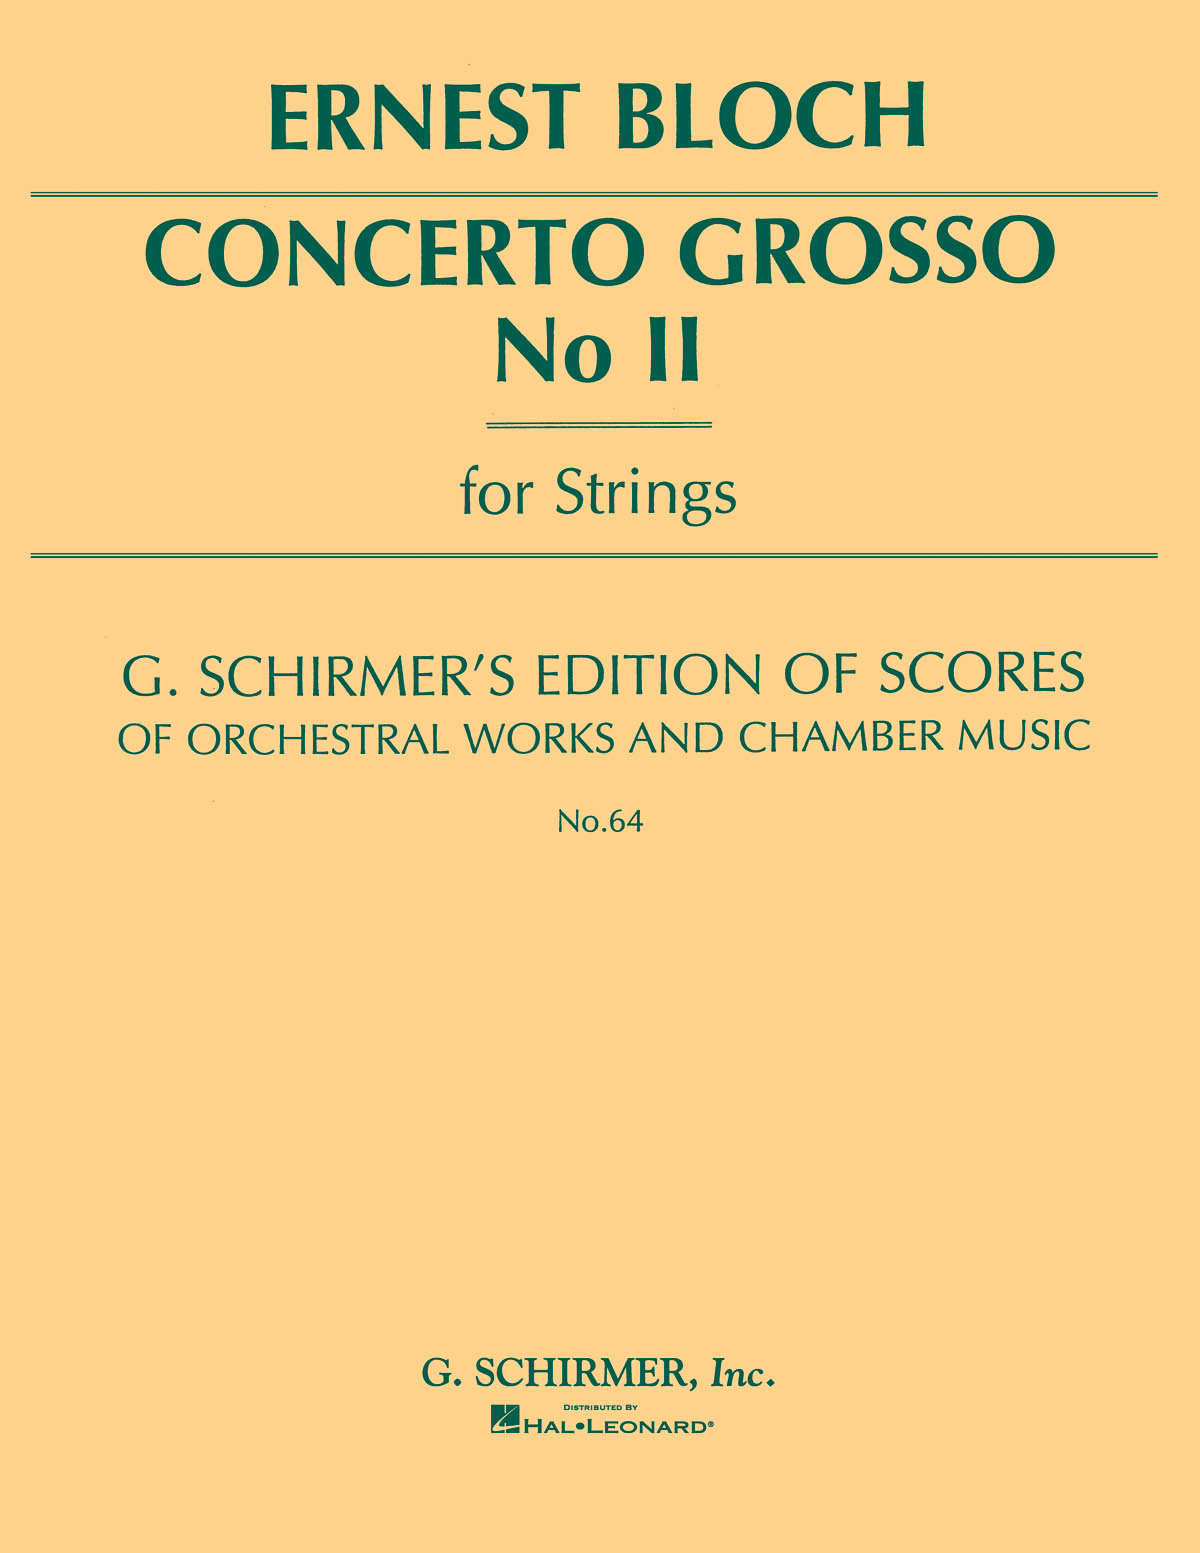 Ernest Bloch: Concerto Grosso No. 2 For Strings (Study Score)